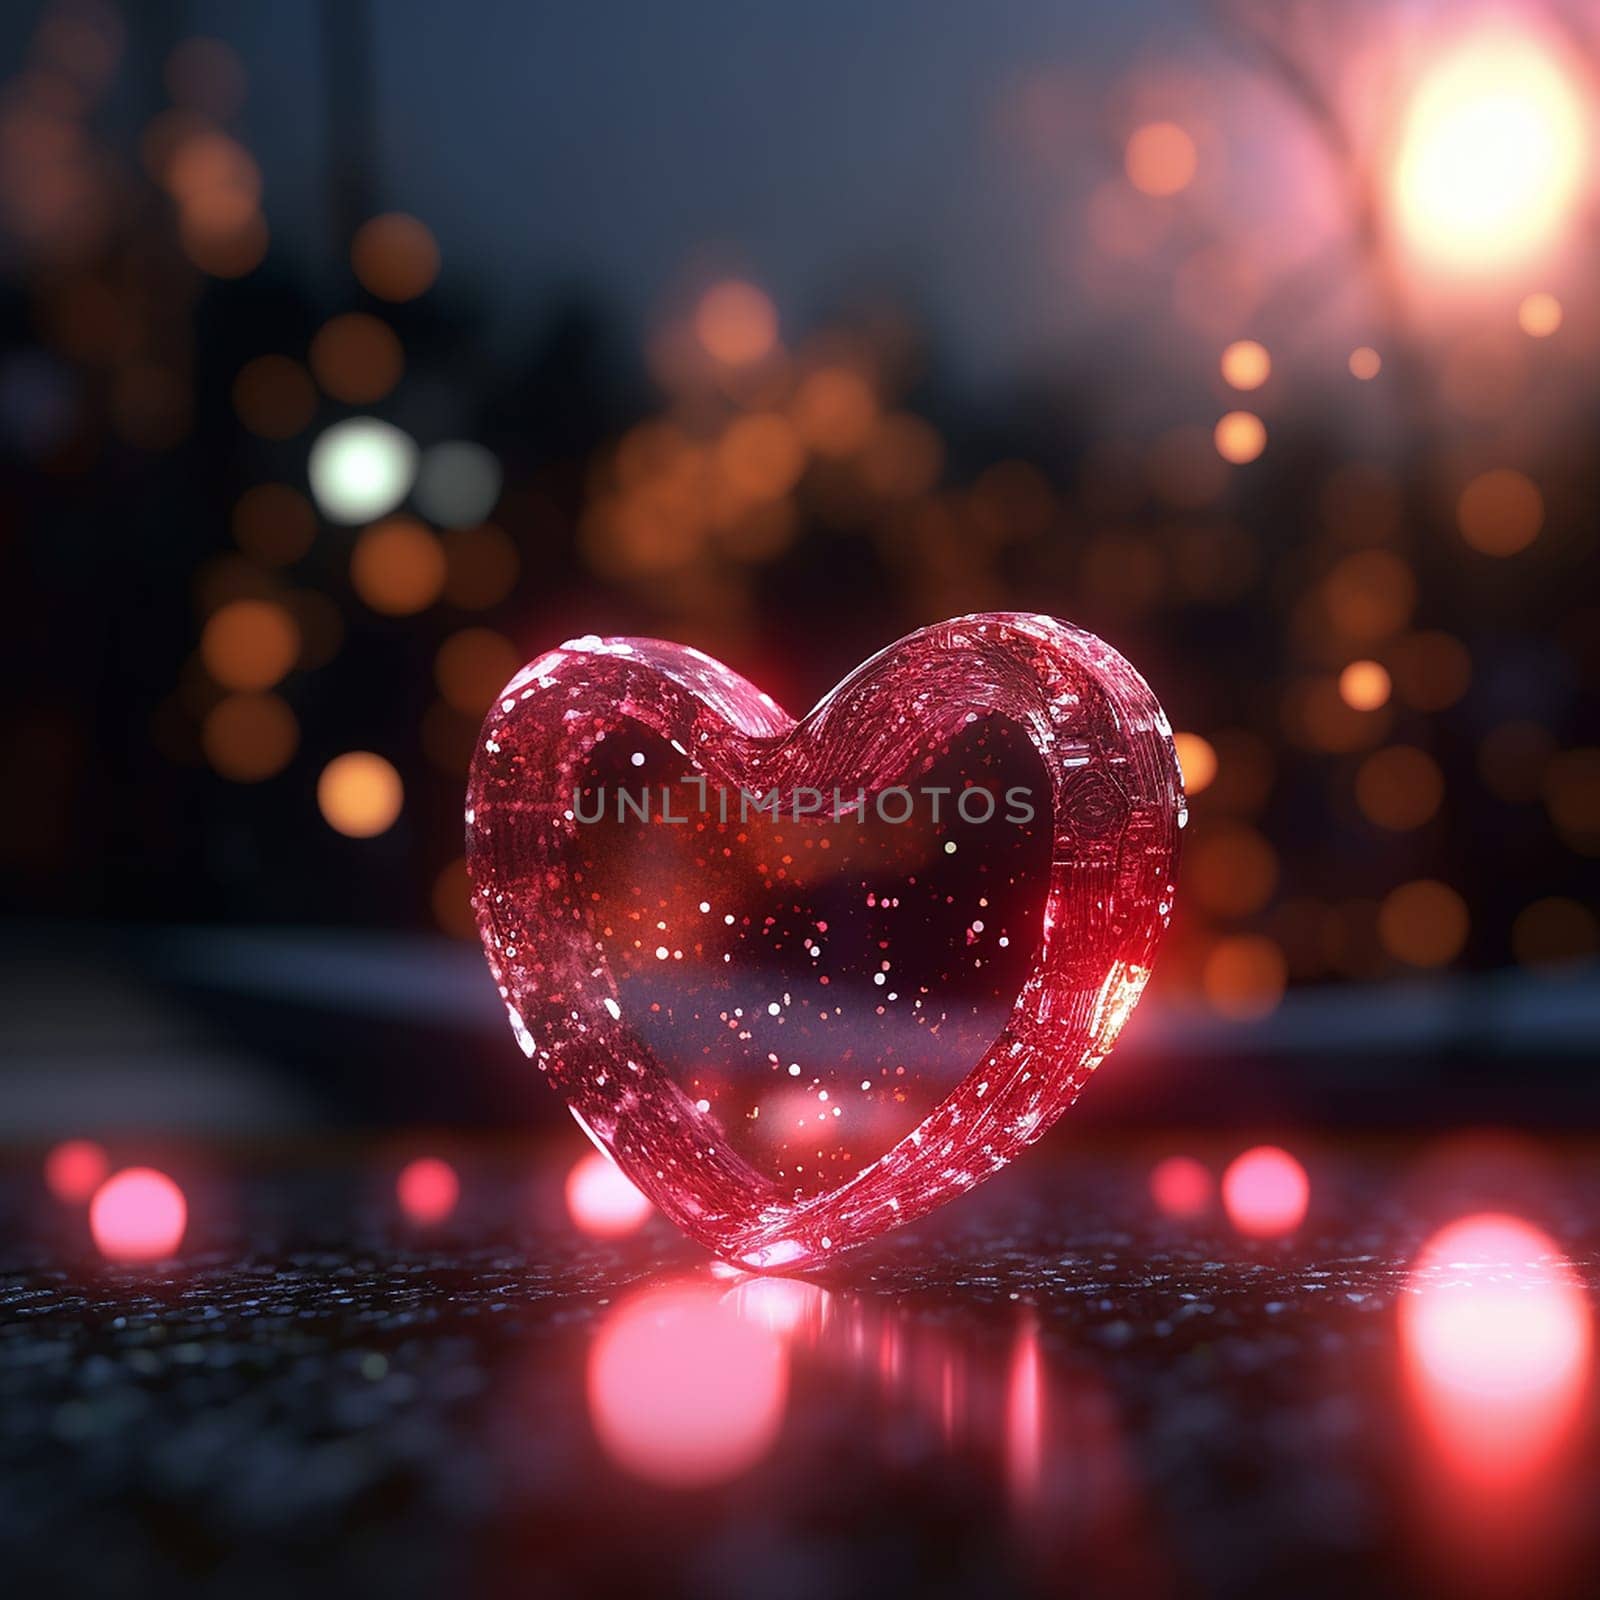 Illuminated red heart shape glowing against a blurred city lights backdrop. by Hype2art